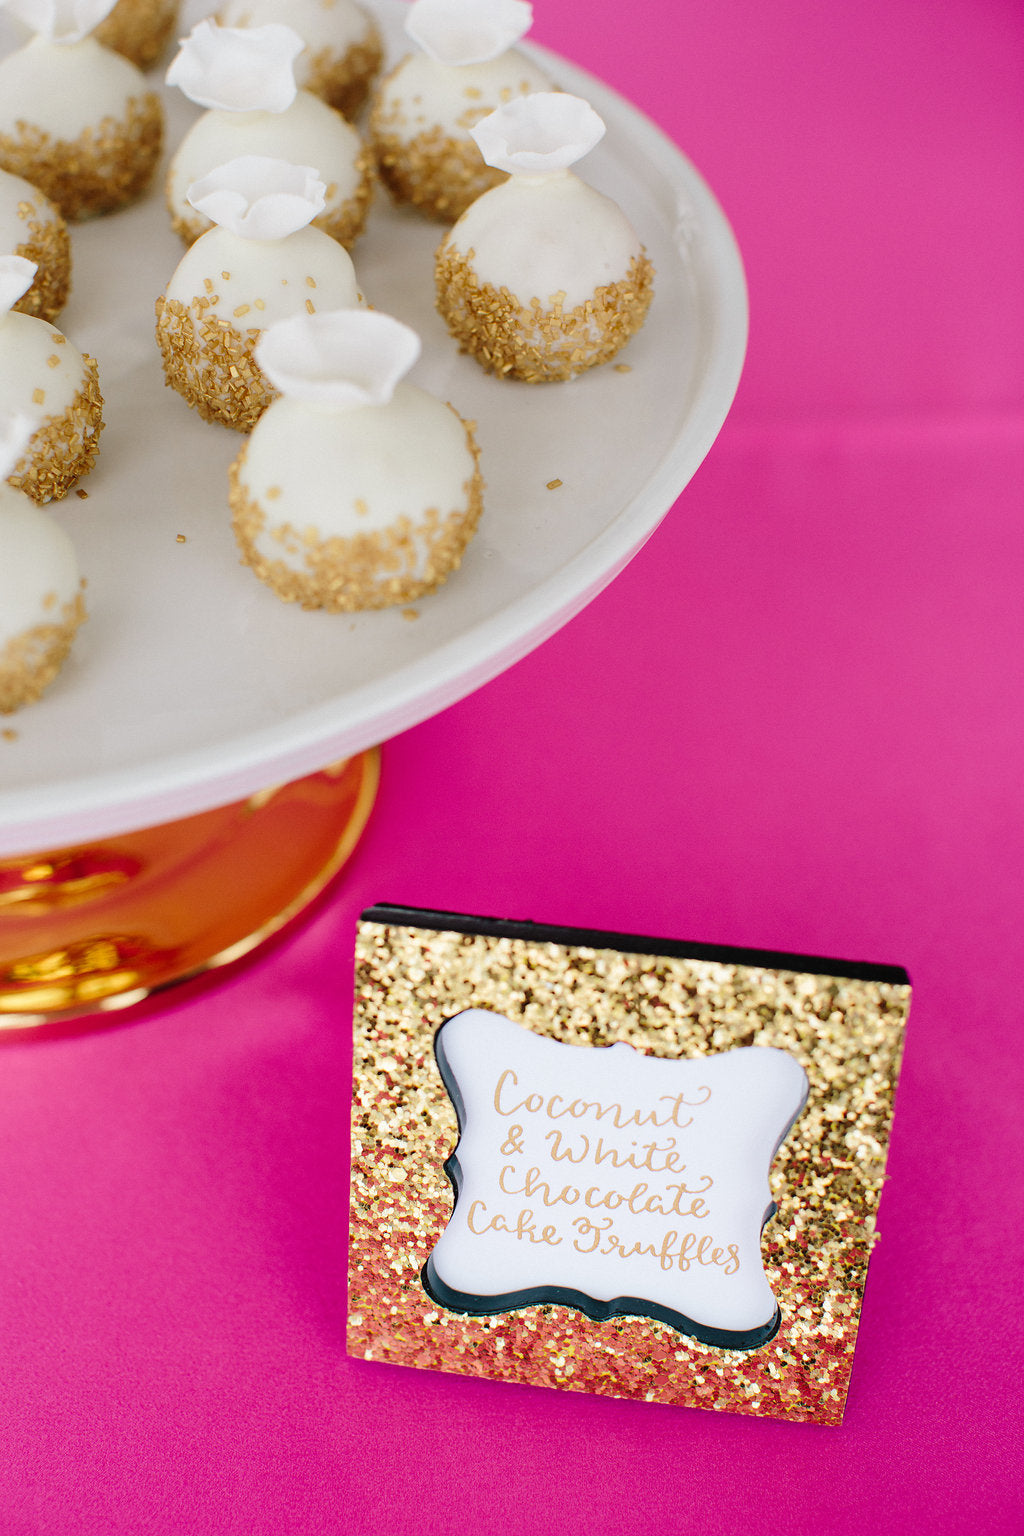 Gem Inspired Bridesmaid Luncheon Coconut and White Chocolate Cake Truffles - Lauren Carnes Photography